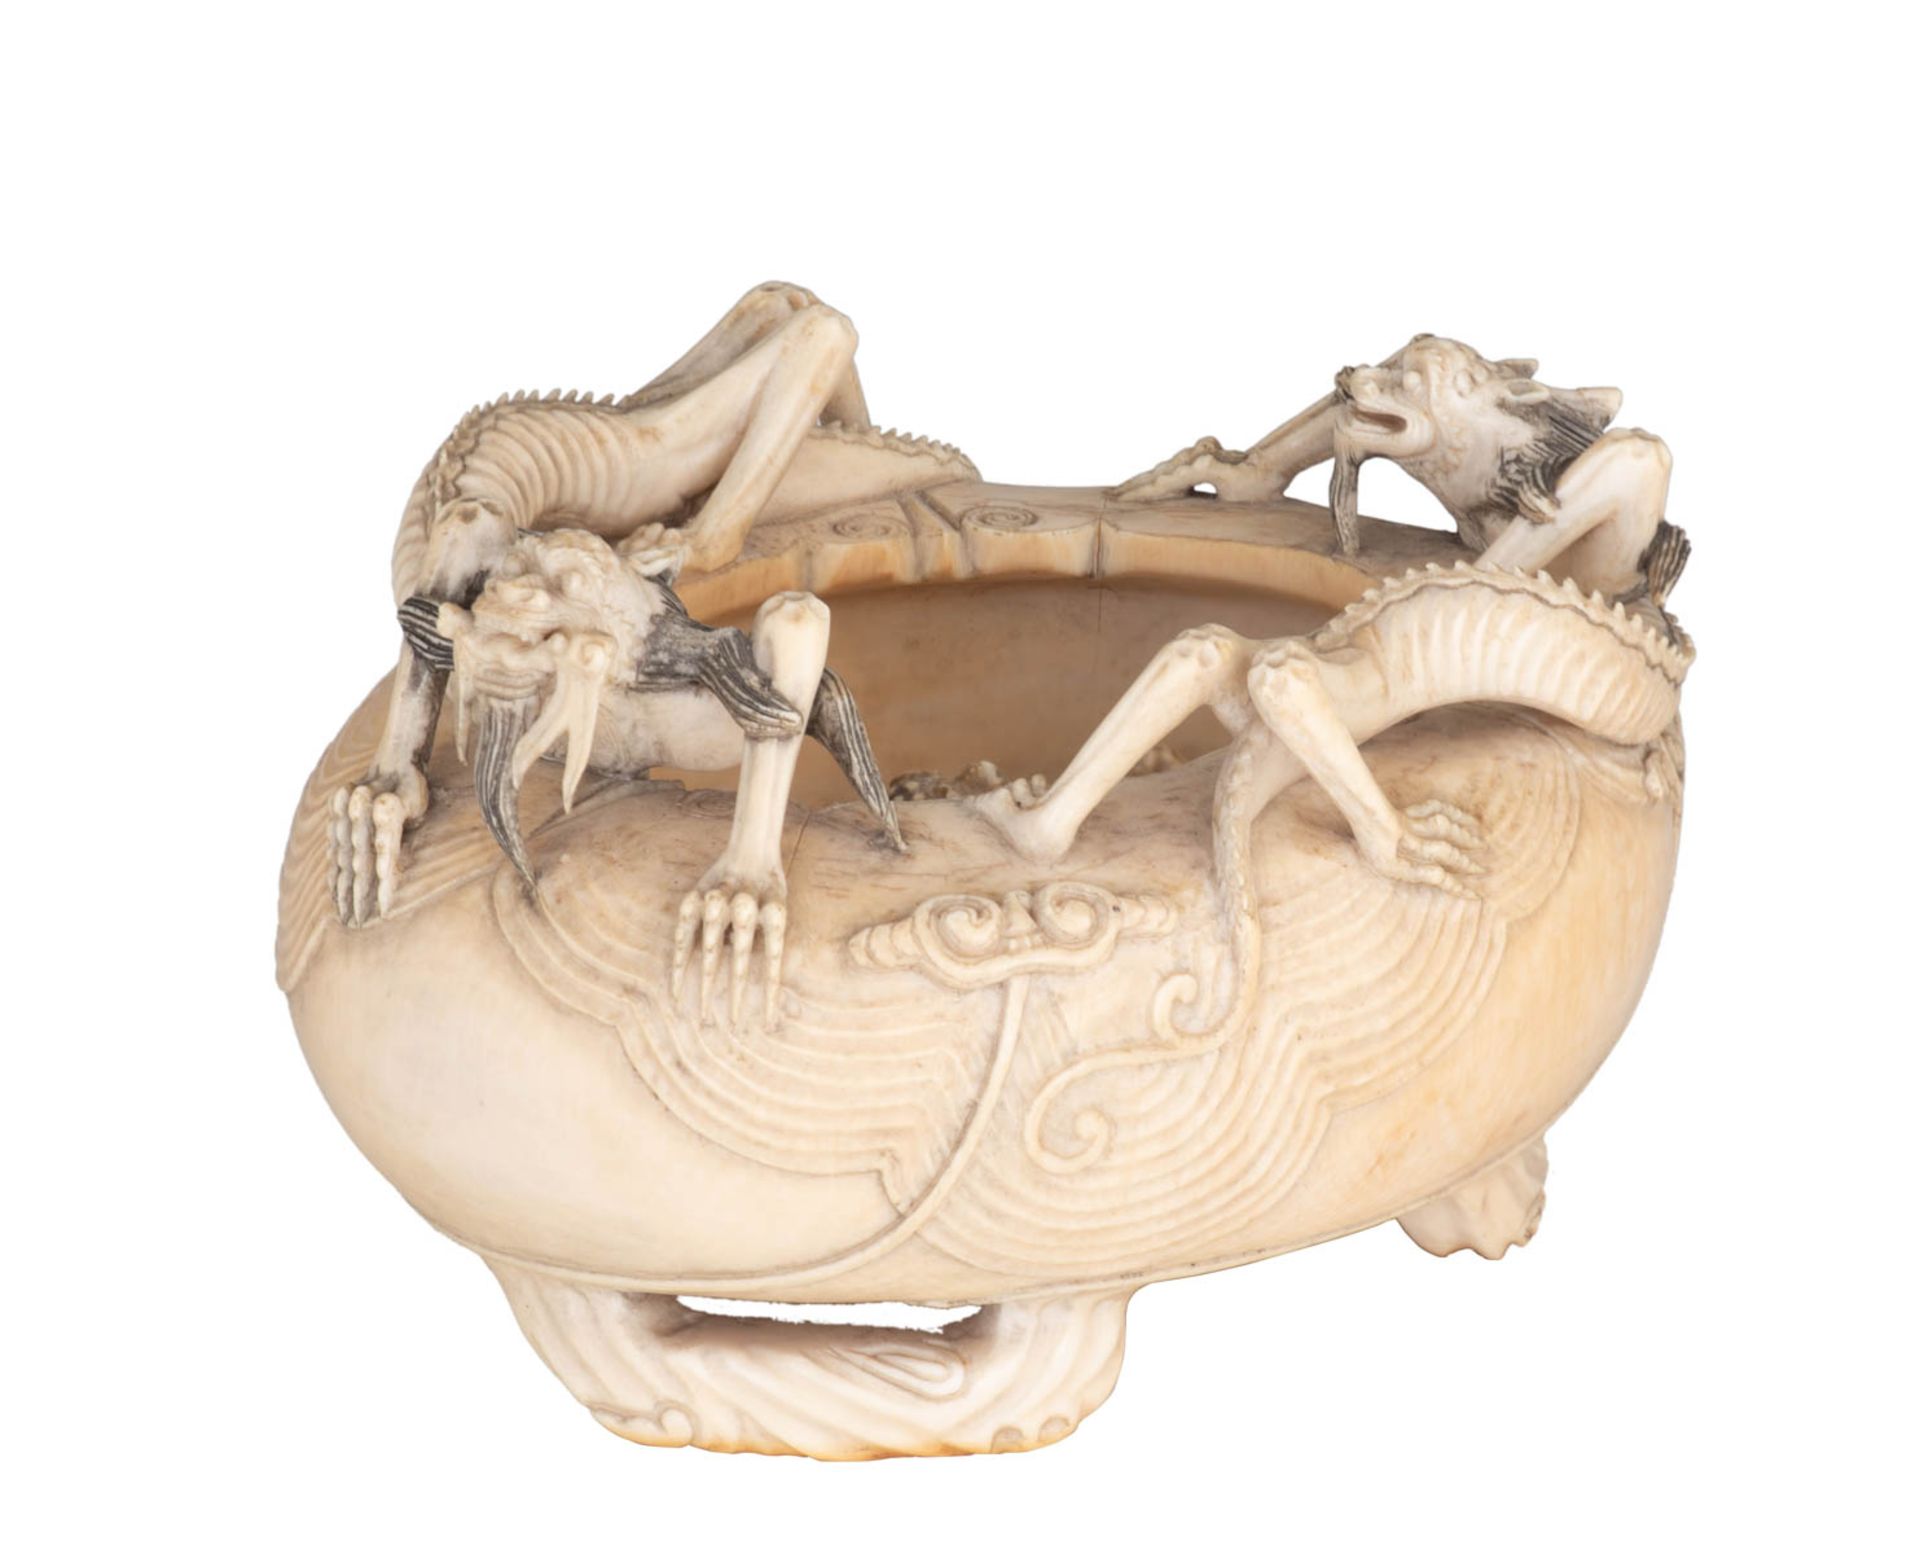 A rare South-East Asian ivory phantasy jar in the shape of a fake brush washer with inside